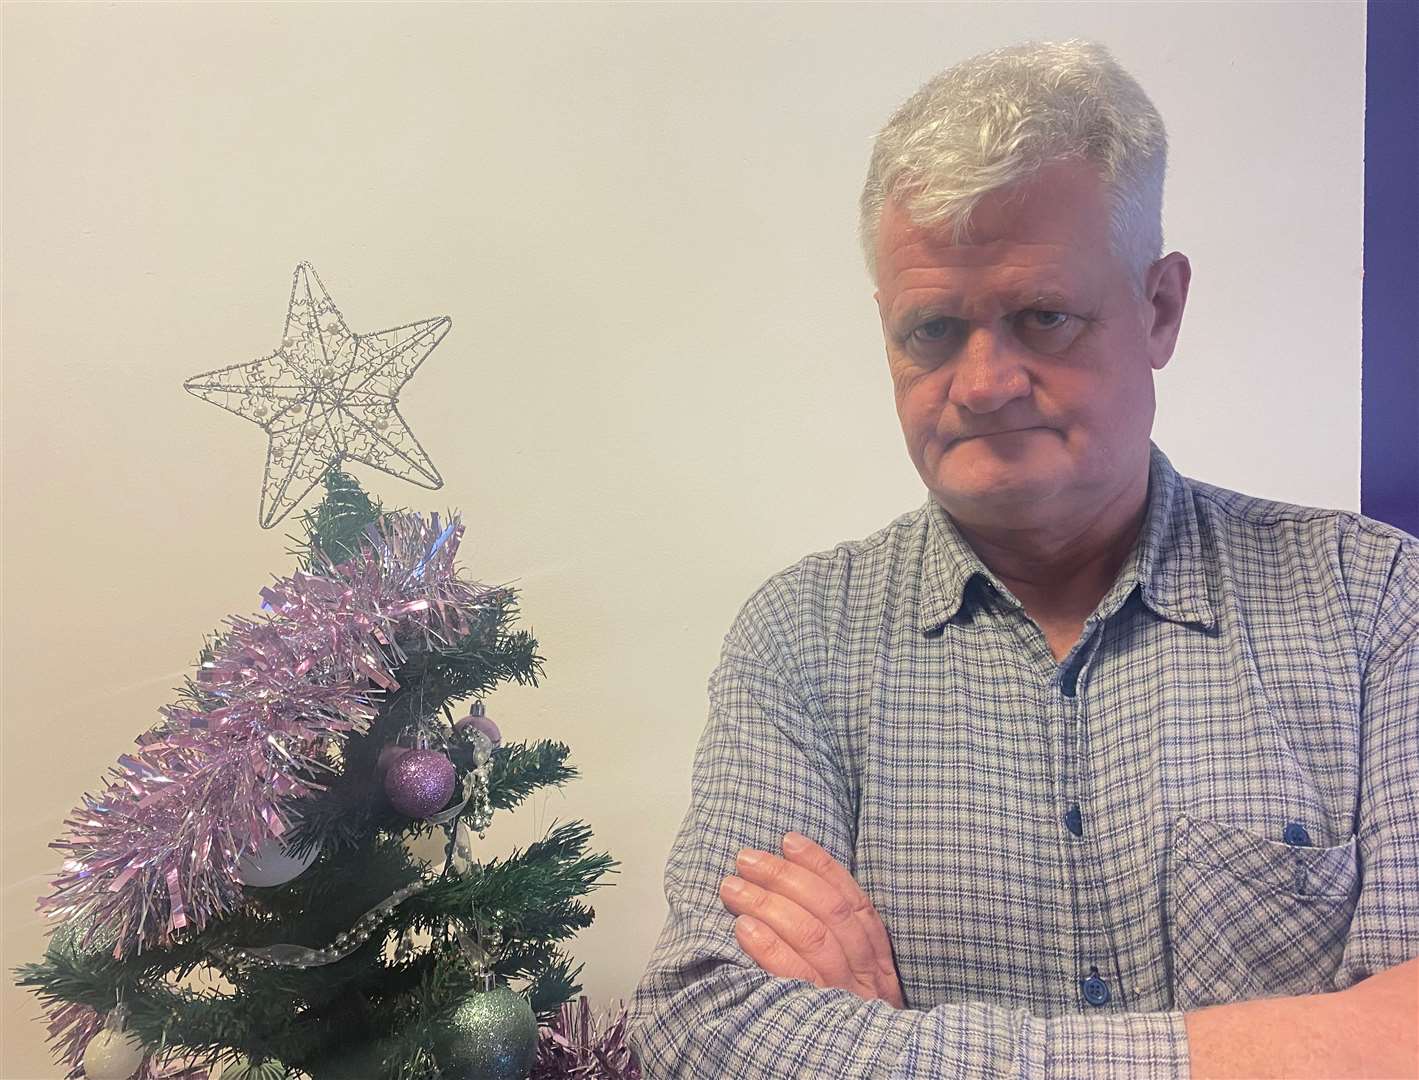 Reporter Sam Lennon has never decorated his house at Christmas and says it's too much effort for one day